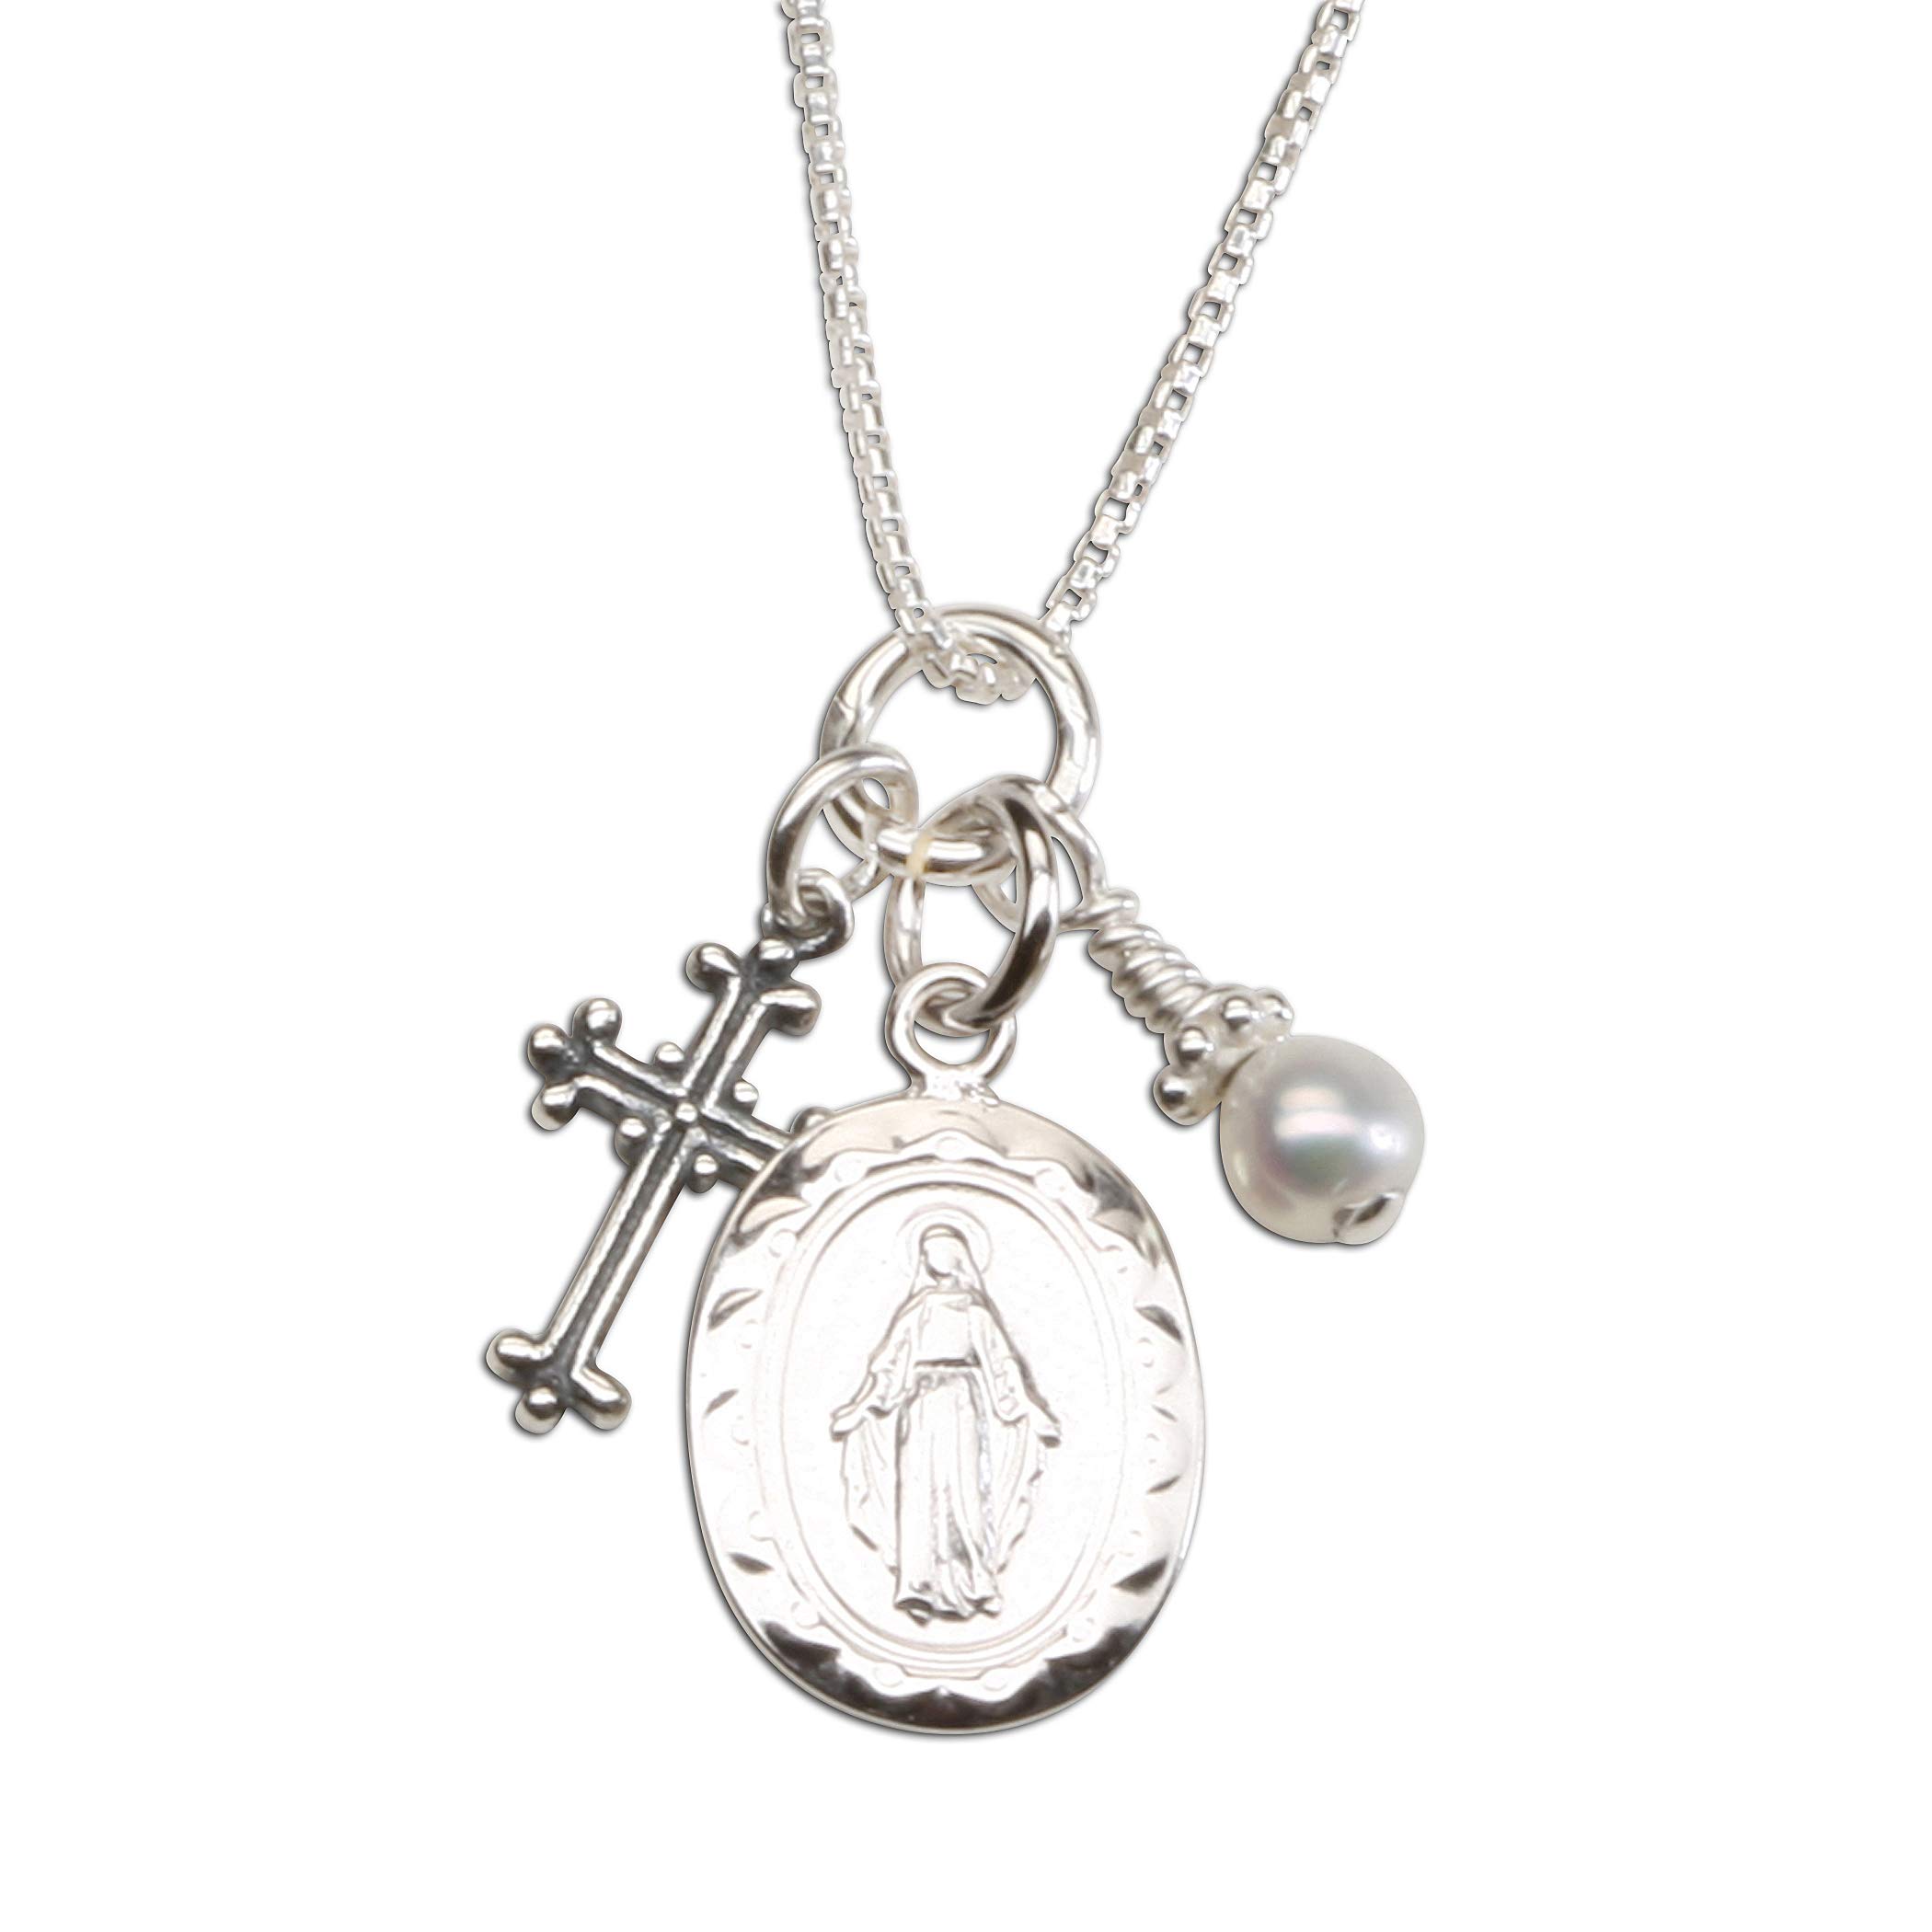 Girl's Sterling Silver Miraculous Necklace or Miraculous Cluster Necklace with Cultured Pearl and Cross